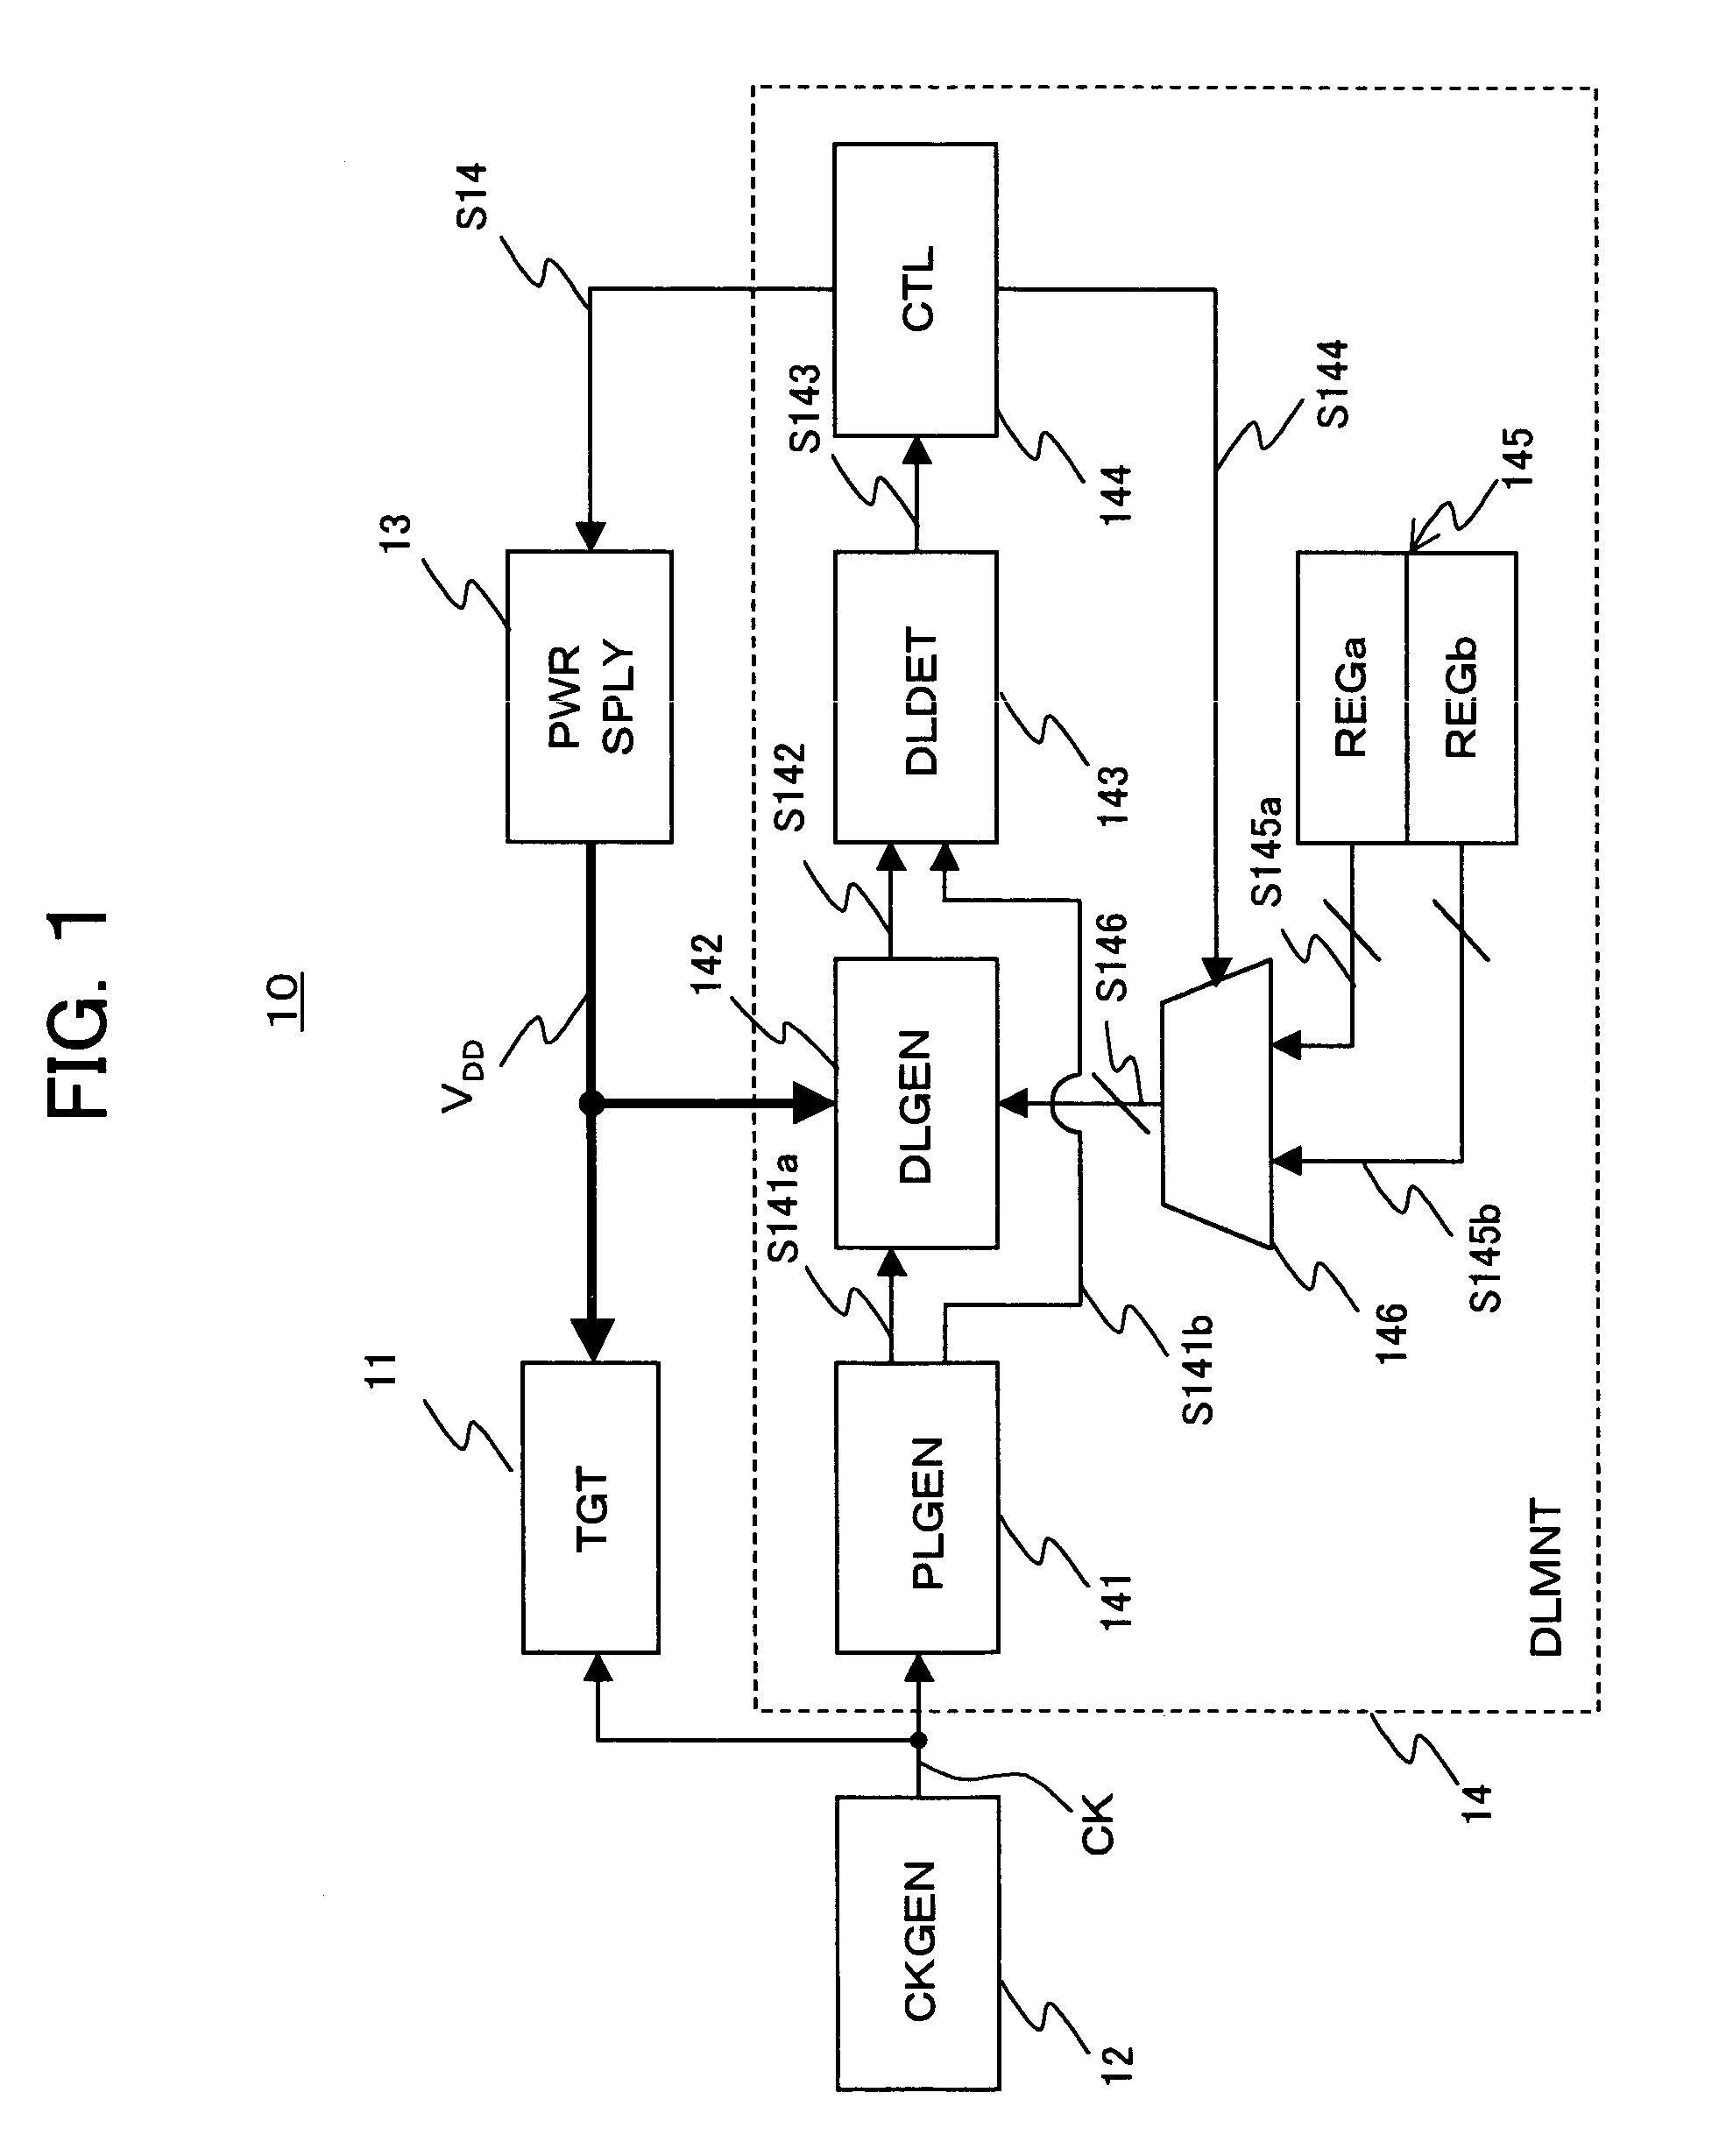 Semiconductor apparatus for monitoring critical path delay characteristics of a target circuit